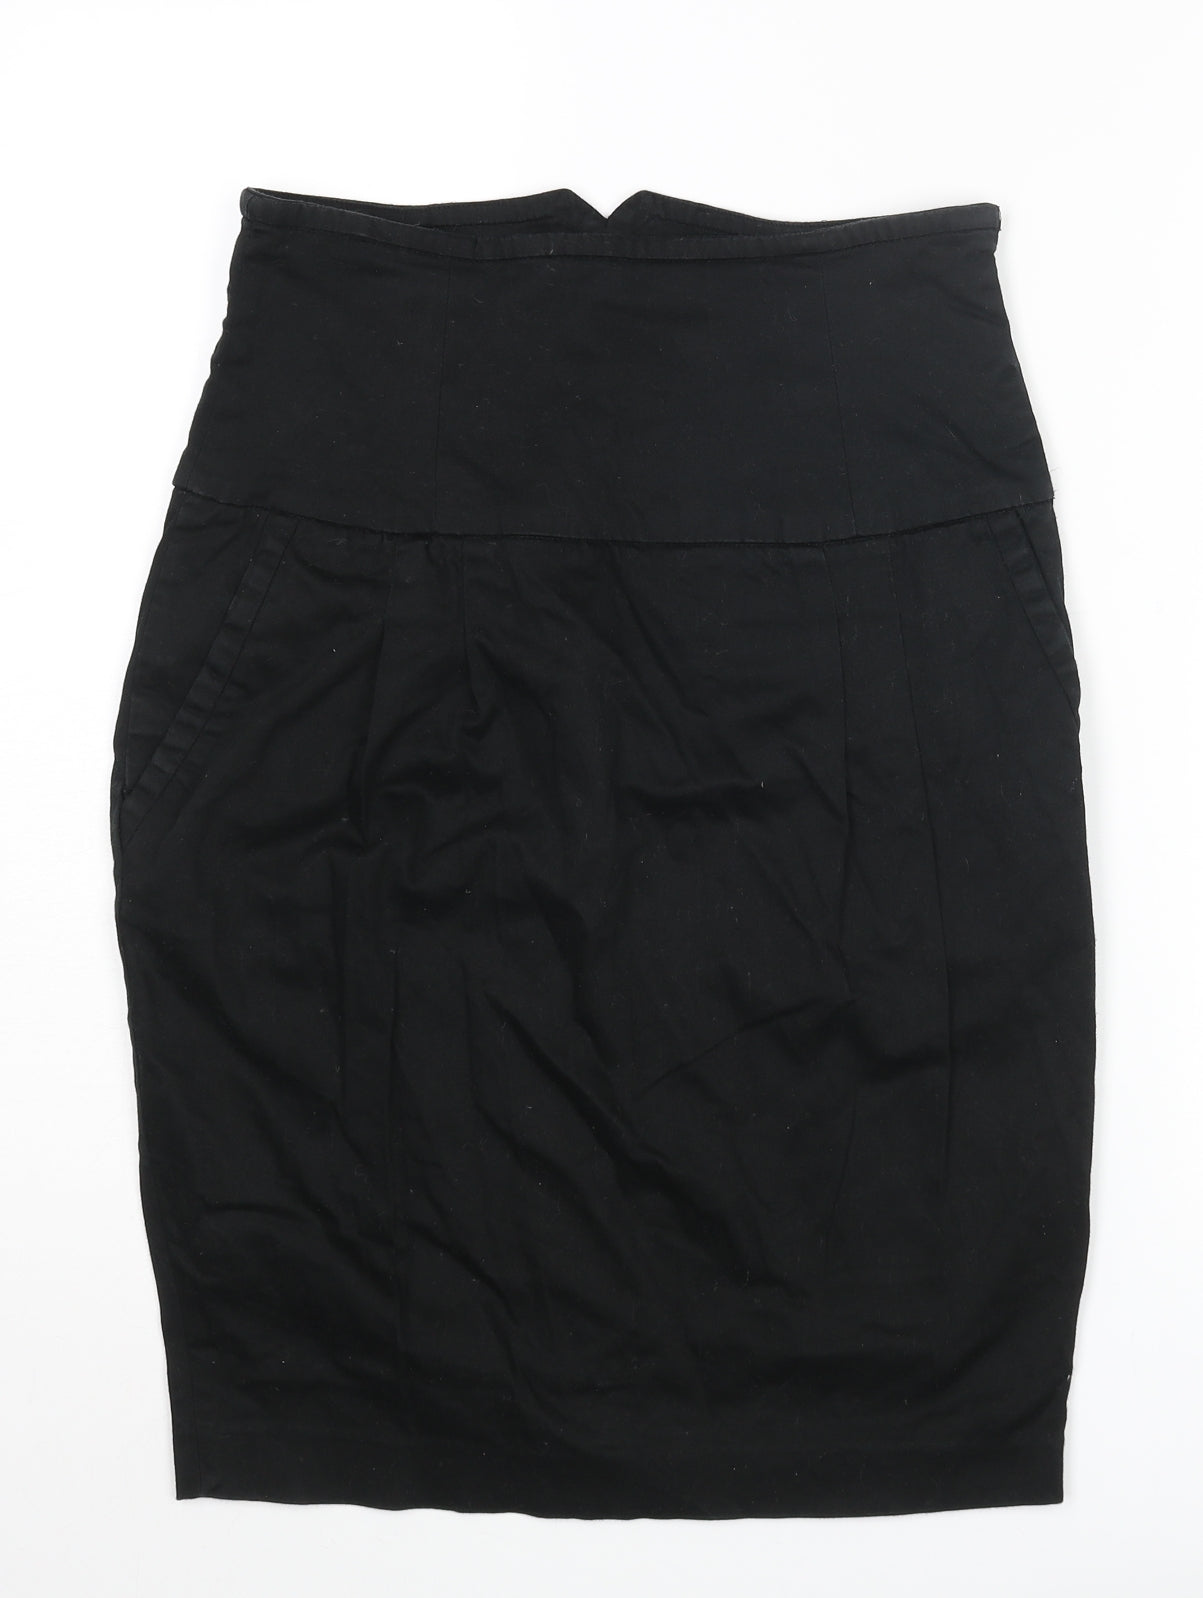 RESERVED Womens Black Polyester Straight & Pencil Skirt Size 10 Zip